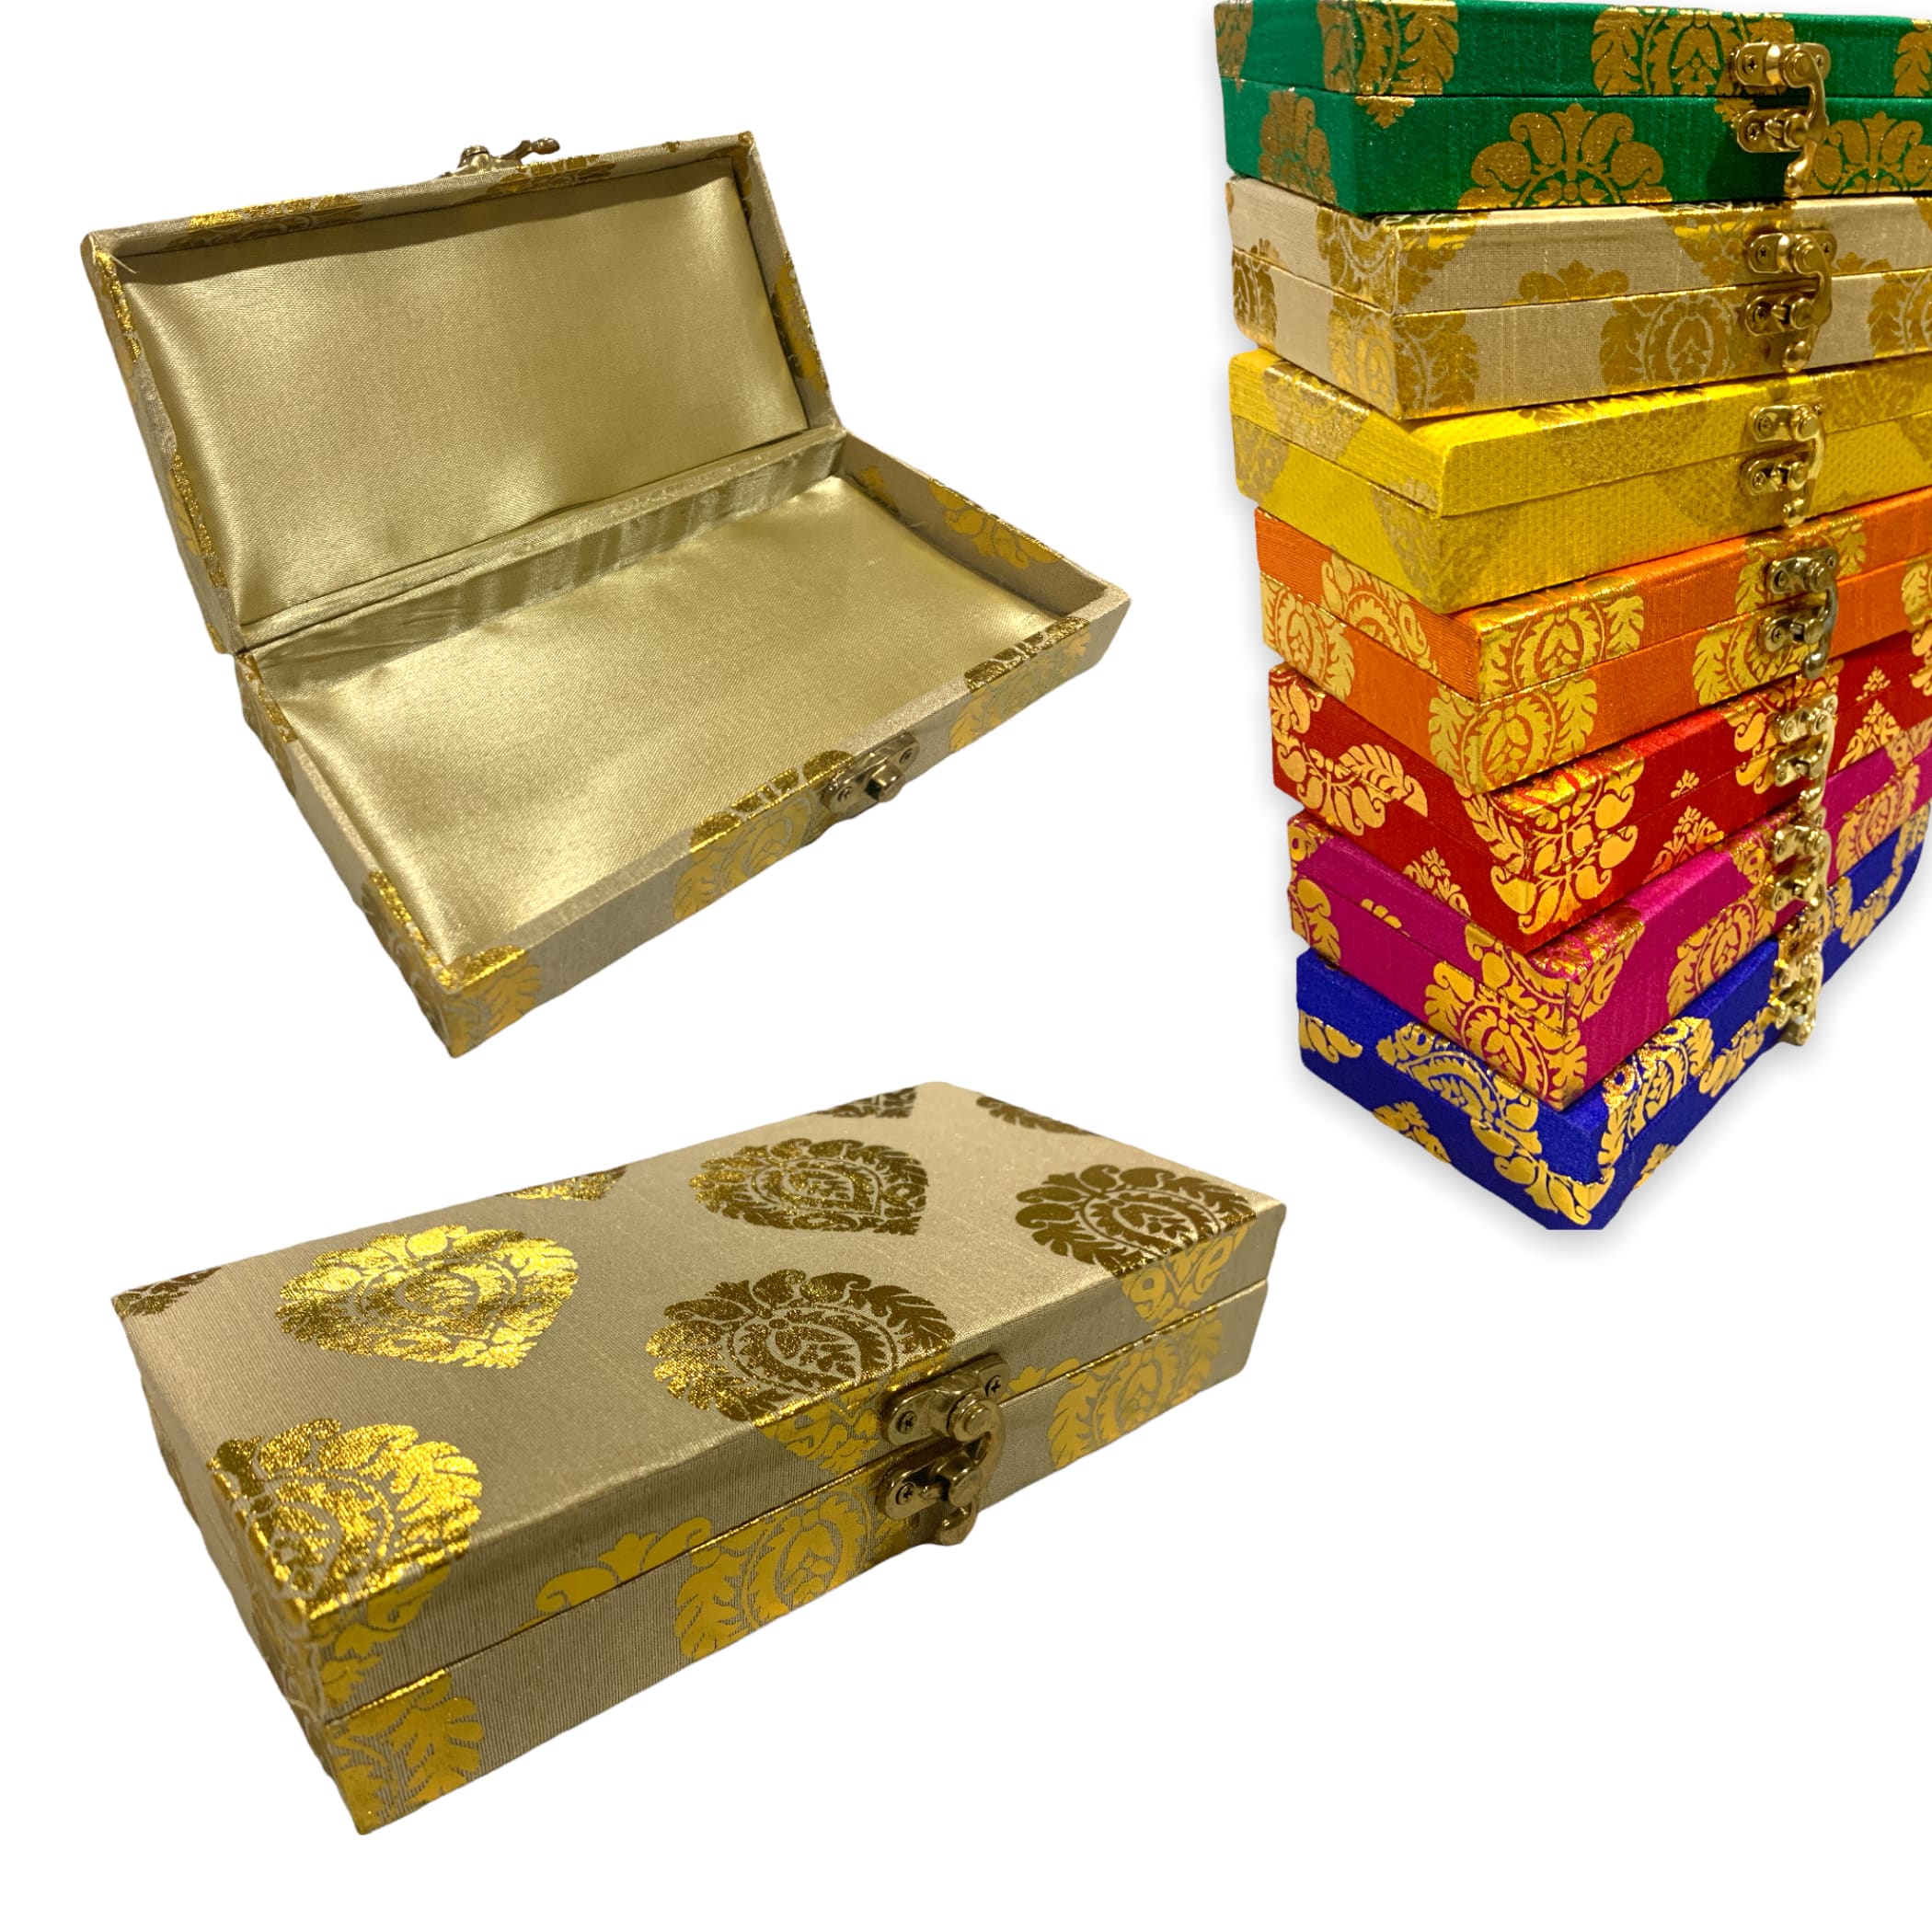 Brocade gift boxes(8x4x1.5 inches) favor for indian muslim